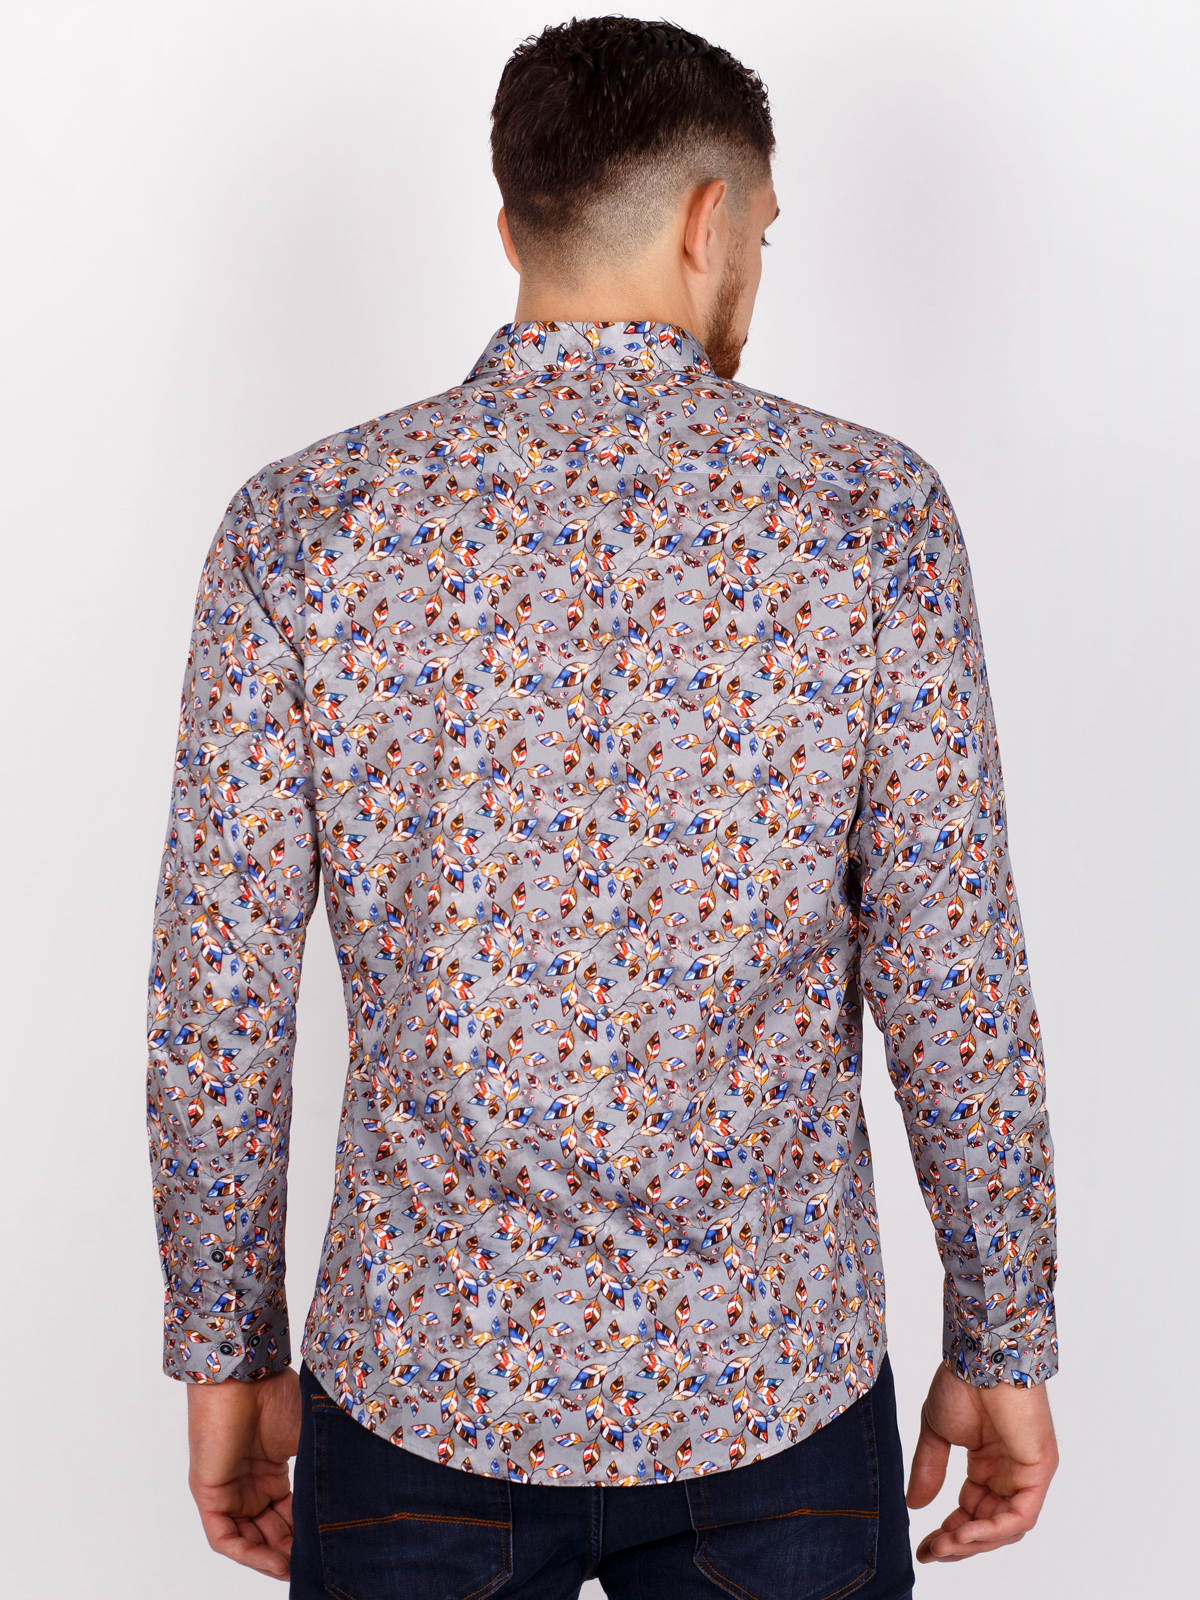 Shirt in gray with a print of colored le - 21499 € 38.81 img3